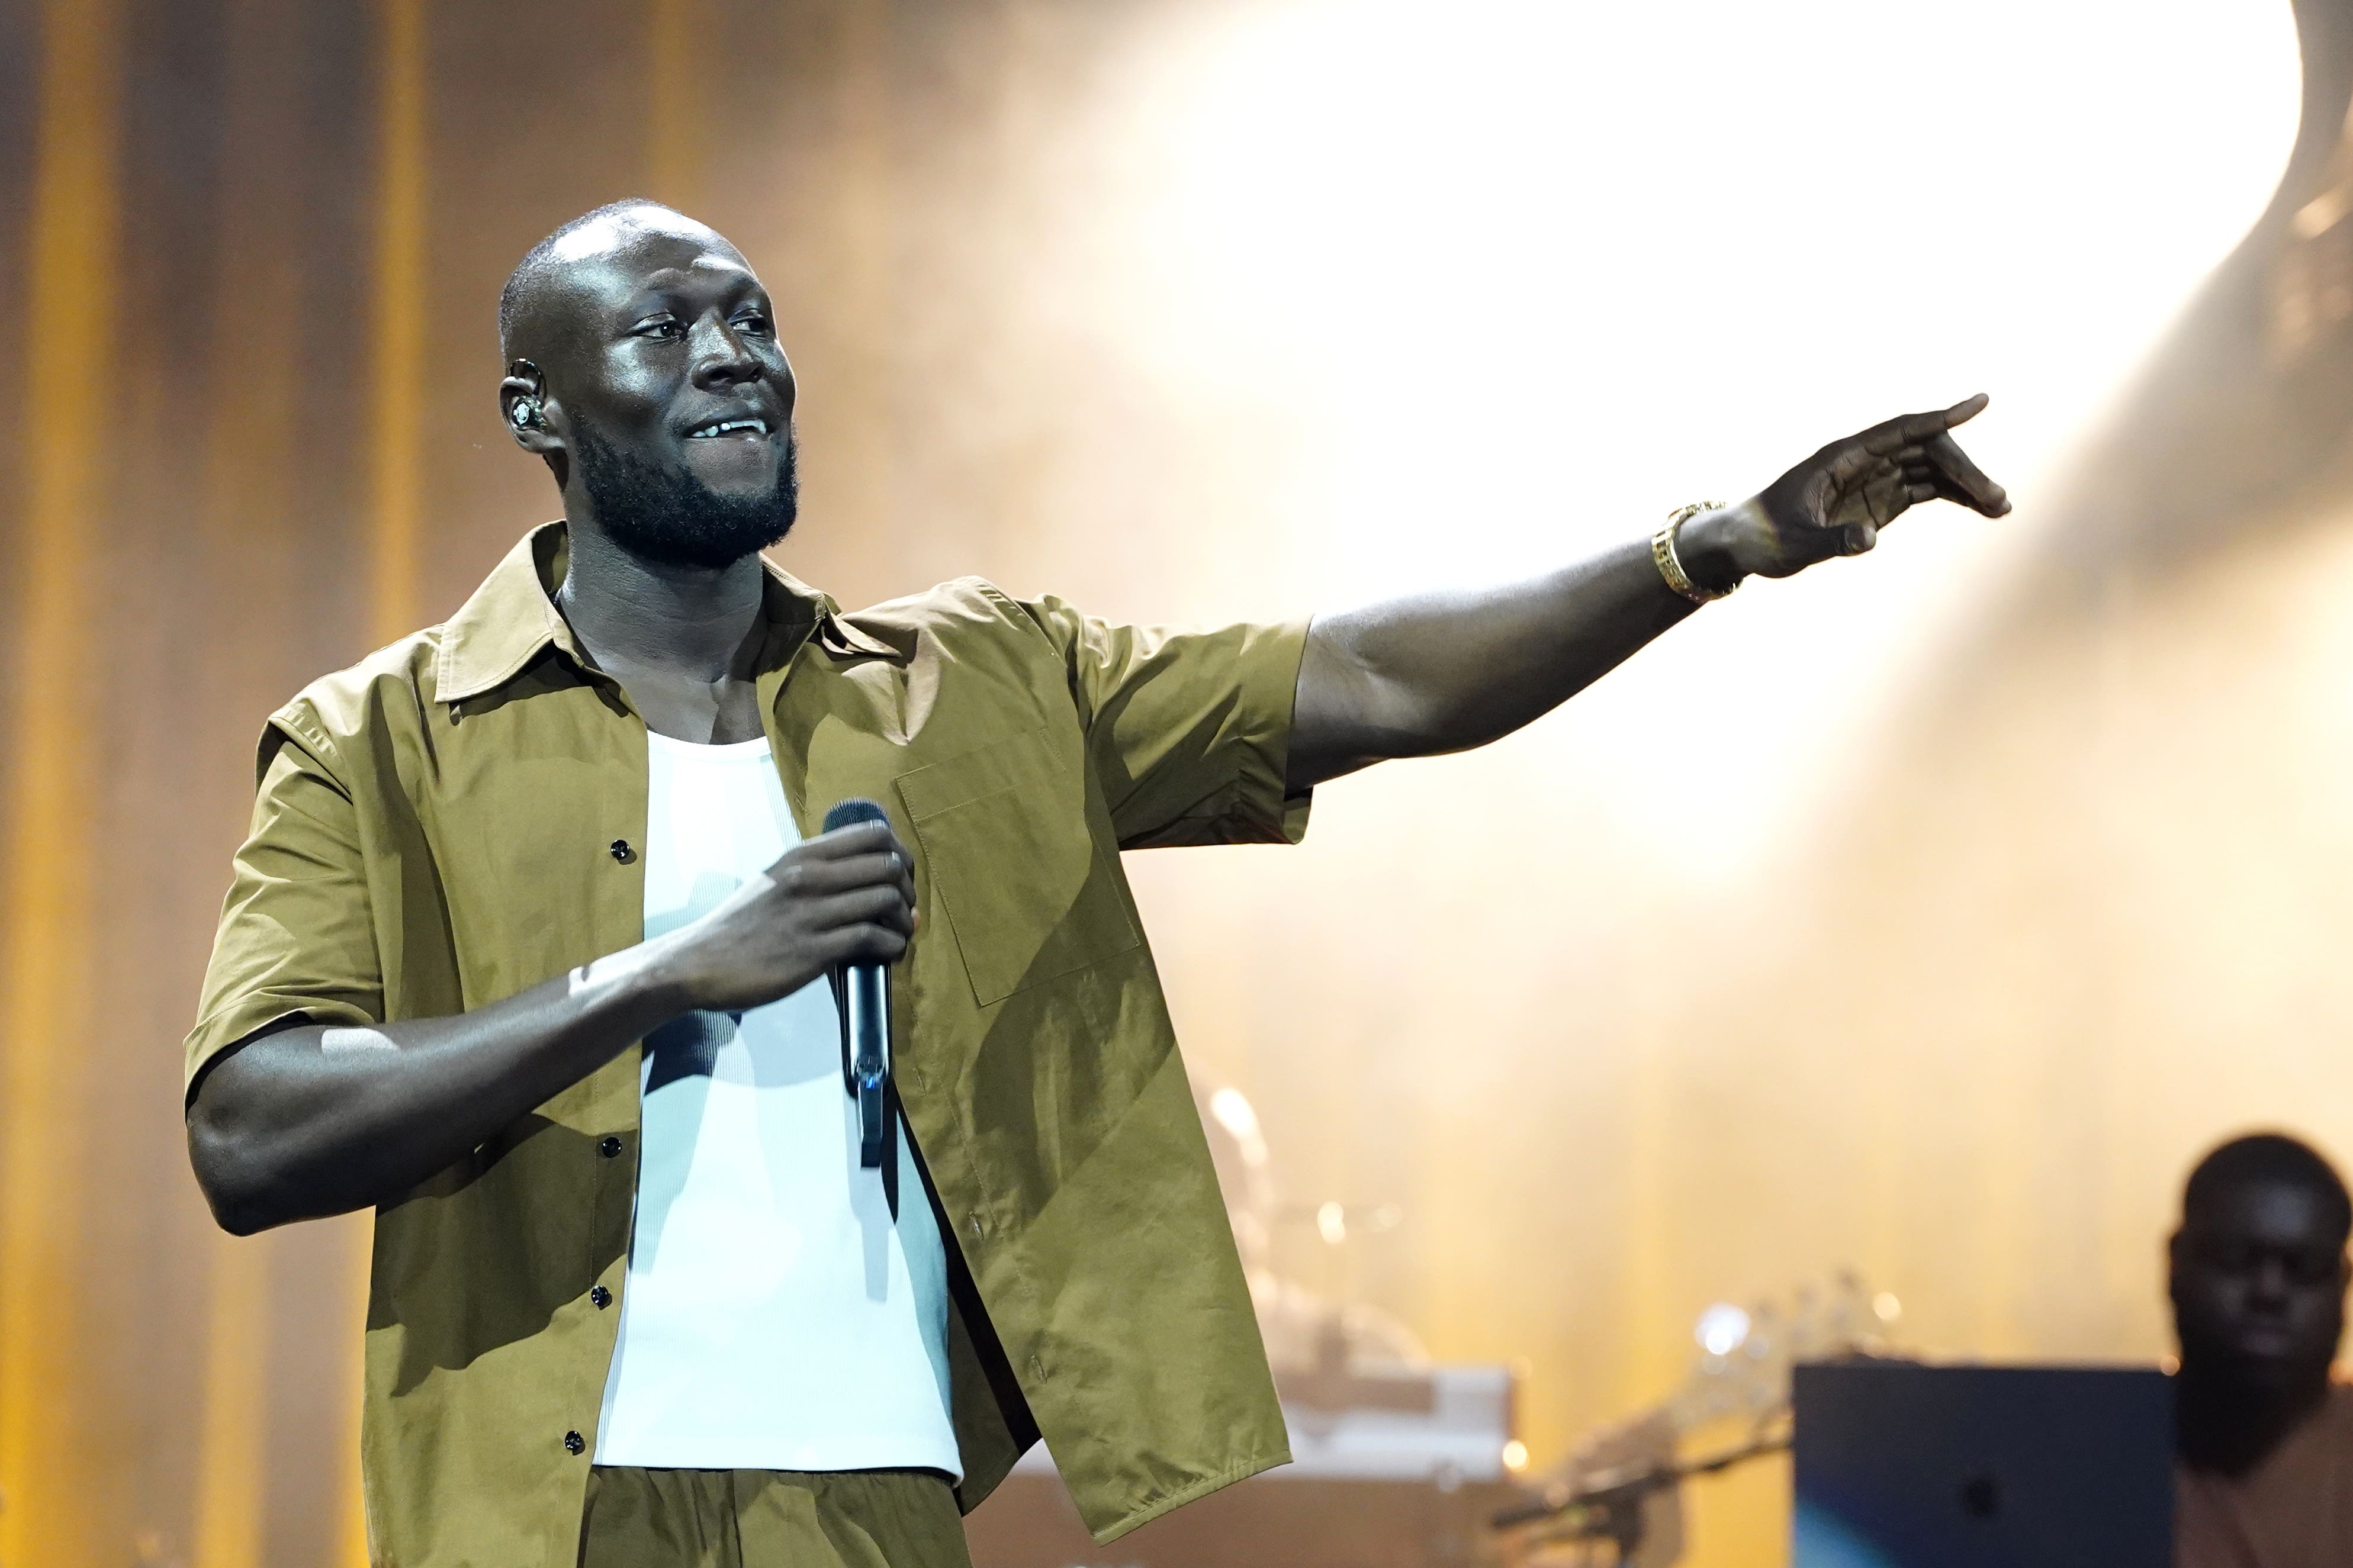 Stormzy has been nominated in four categories, including, Best Male Act, Album of The Year and Song of The Year